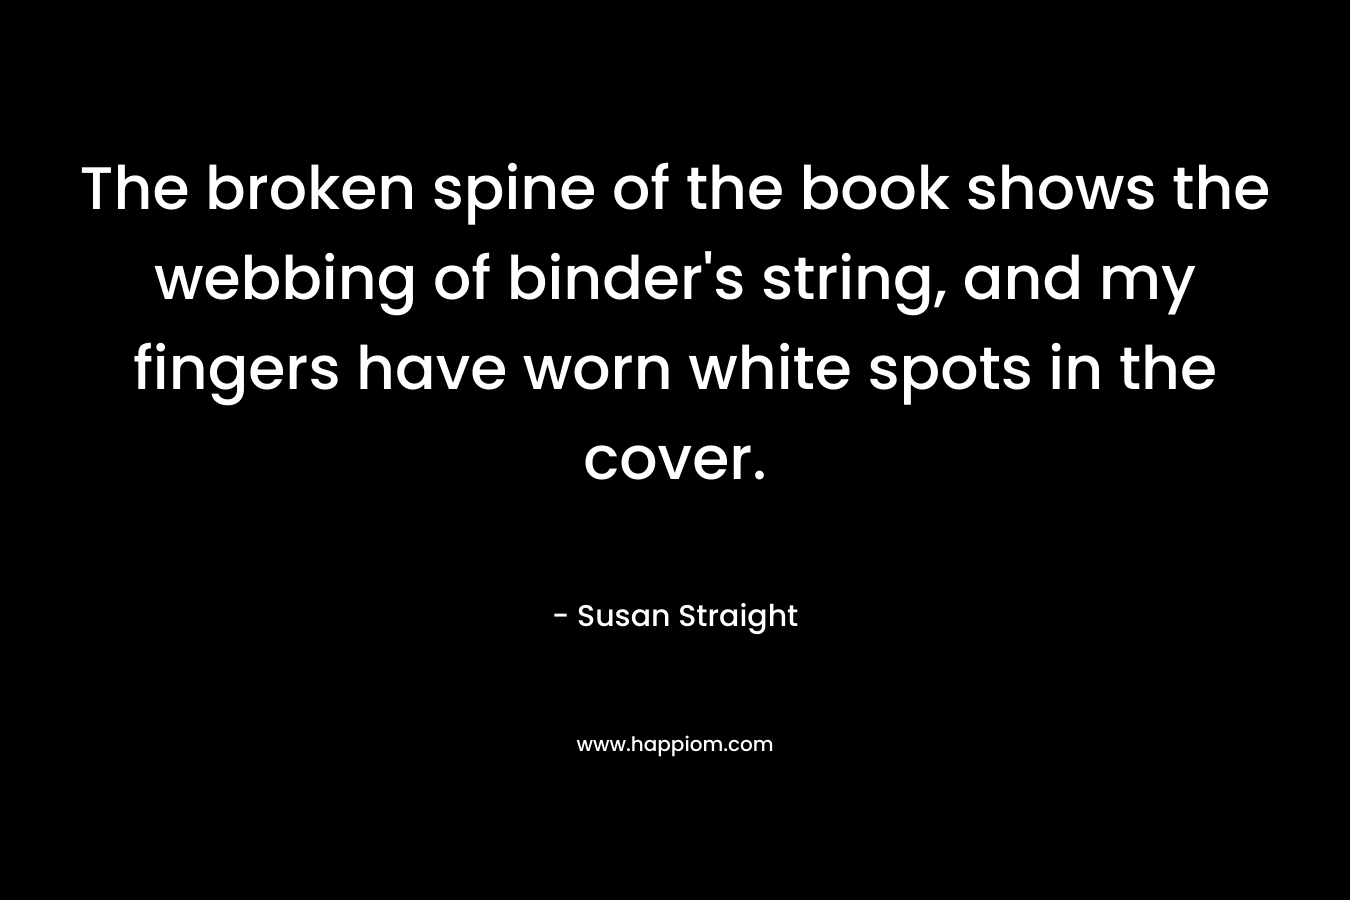 The broken spine of the book shows the webbing of binder’s string, and my fingers have worn white spots in the cover. – Susan Straight